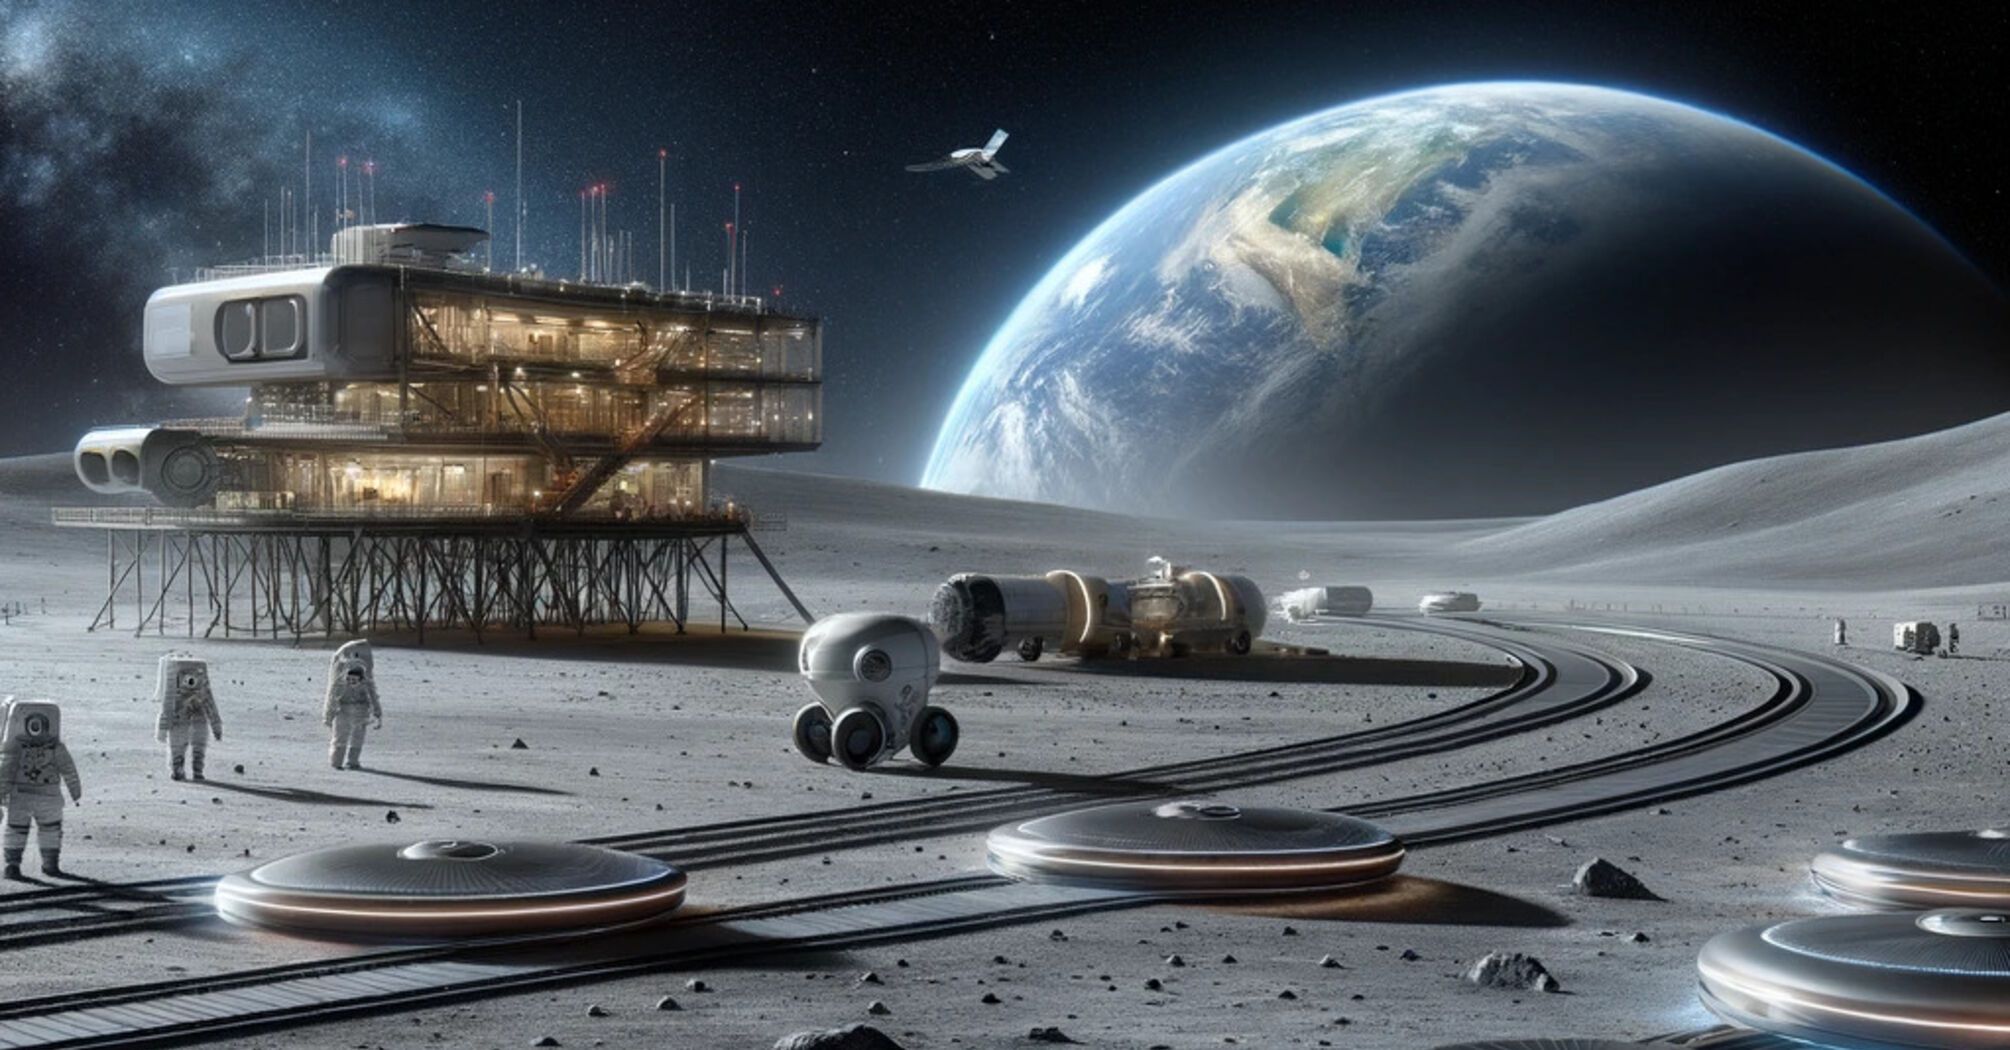 NASA's robotic lunar transportation system with astronauts and Earth in the background